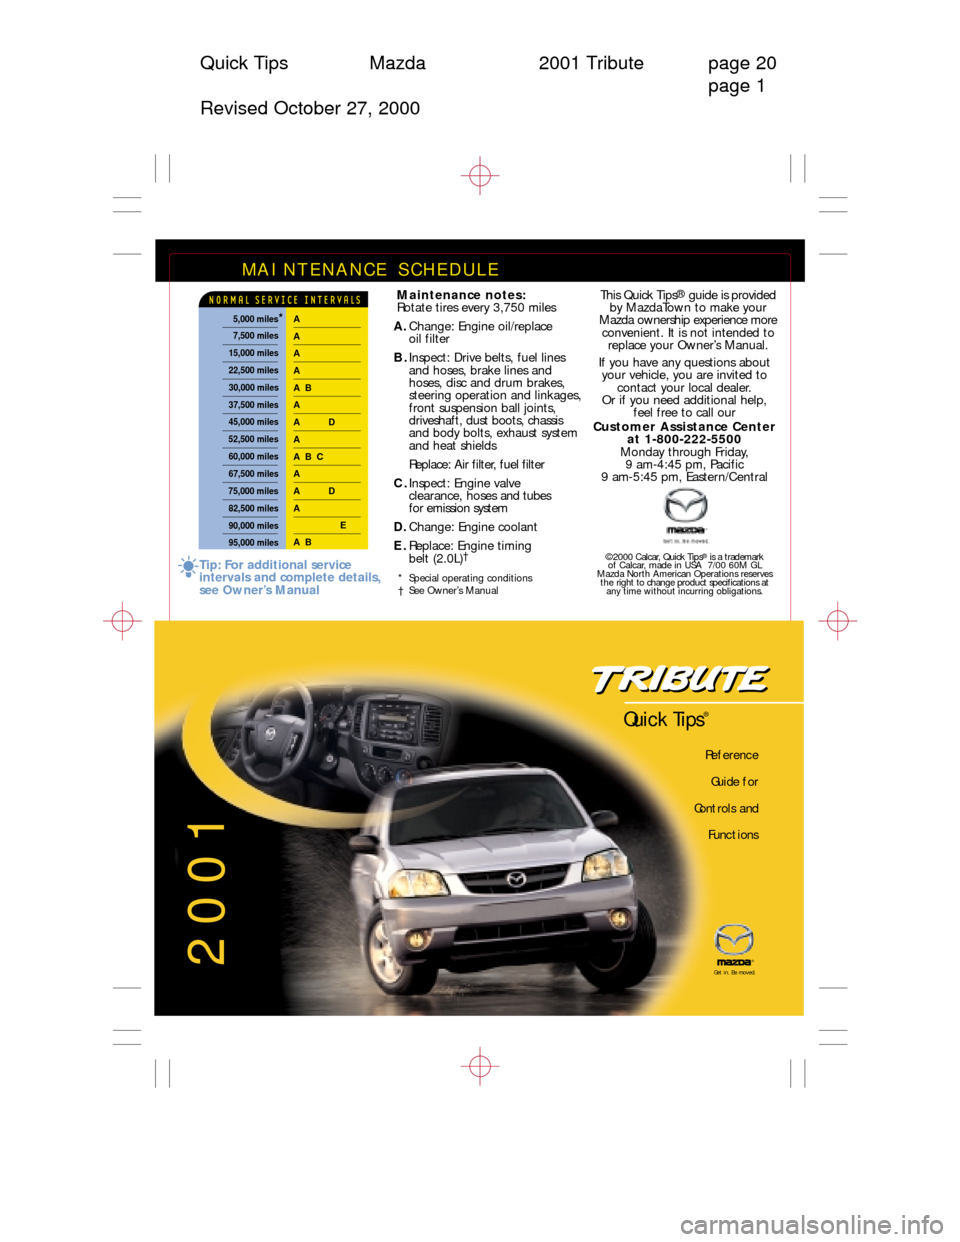 MAZDA MODEL TRIBUTE 2001  Quick Tips (in English) Quick Tips Mazda 2001 Tribute page 20
page 1
Revised October 27, 2000
MAINTENANCE SCHEDULE 
Maintenance notes:
Rotate tires every 3,750 miles
A.Change: Engine oil/replace 
oil filter
B.Inspect: Drive 